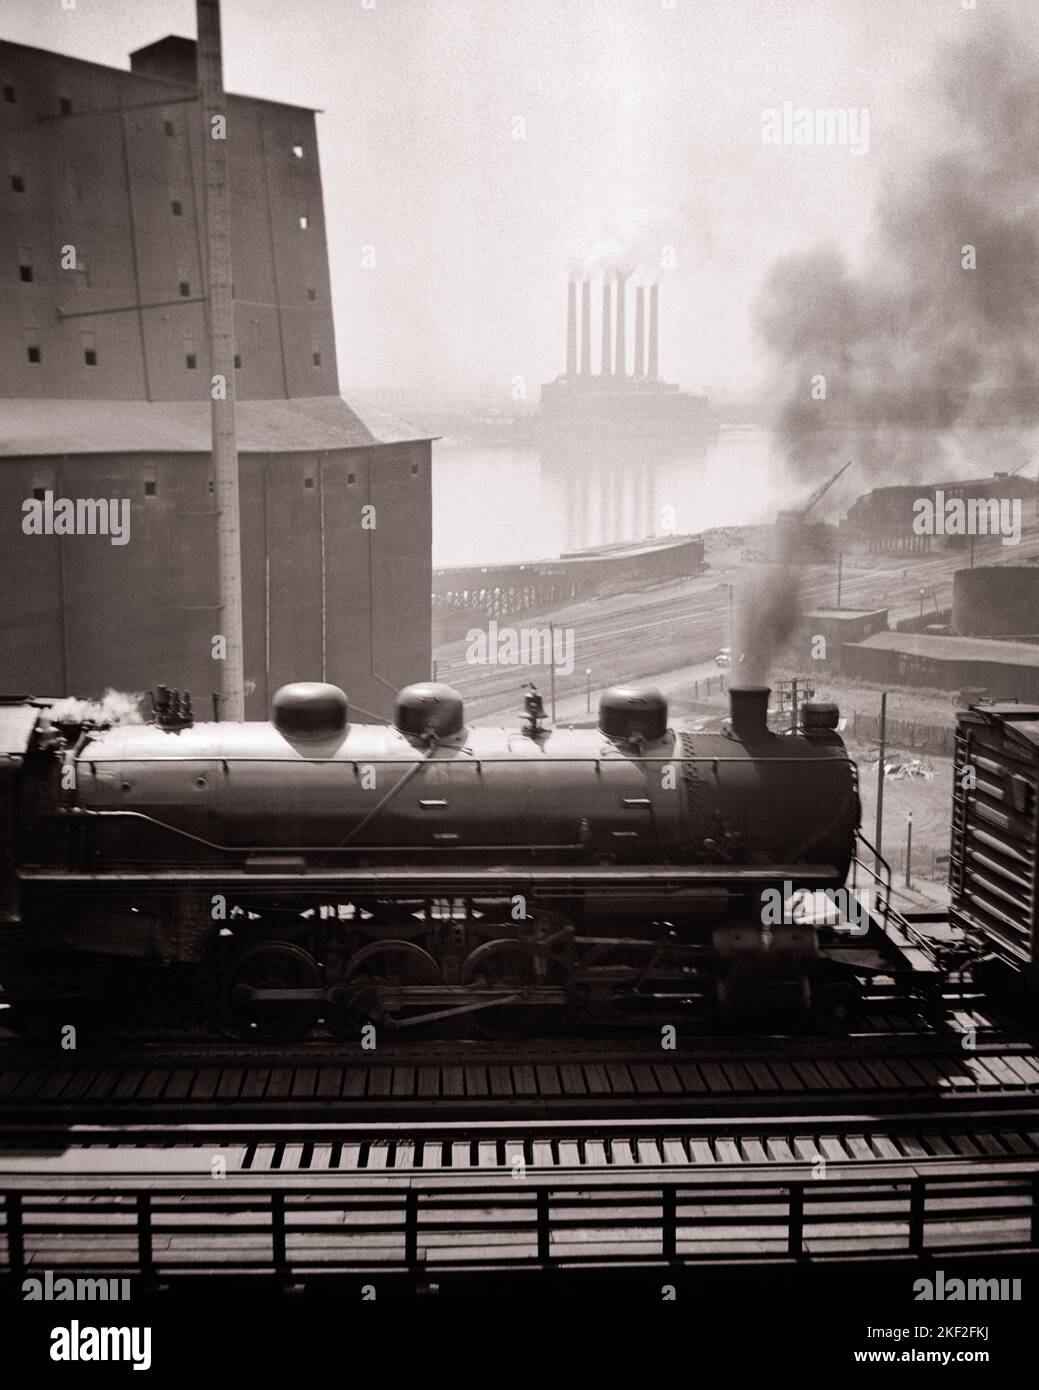 1930s STEAM TRAIN BY GRAIN ELEVATOR MISSISSIPPI RIVER CAHOKIA IL POWER PLANT FROM THE MUNICIPAL BRIDGE ST LOUIS MISSOURI USA - q37738 CPC001 HARS ELEVATOR CONCEPT CONCEPTUAL INFRASTRUCTURE RAILROADS SYMBOLIC CONCEPTS GROWTH BLACK AND WHITE CLOUDY IL MIDWEST MIDWESTERN MISSISSIPPI MO MUNICIPAL OLD FASHIONED REPRESENTATION SMOKY ST LOUIS Stock Photo